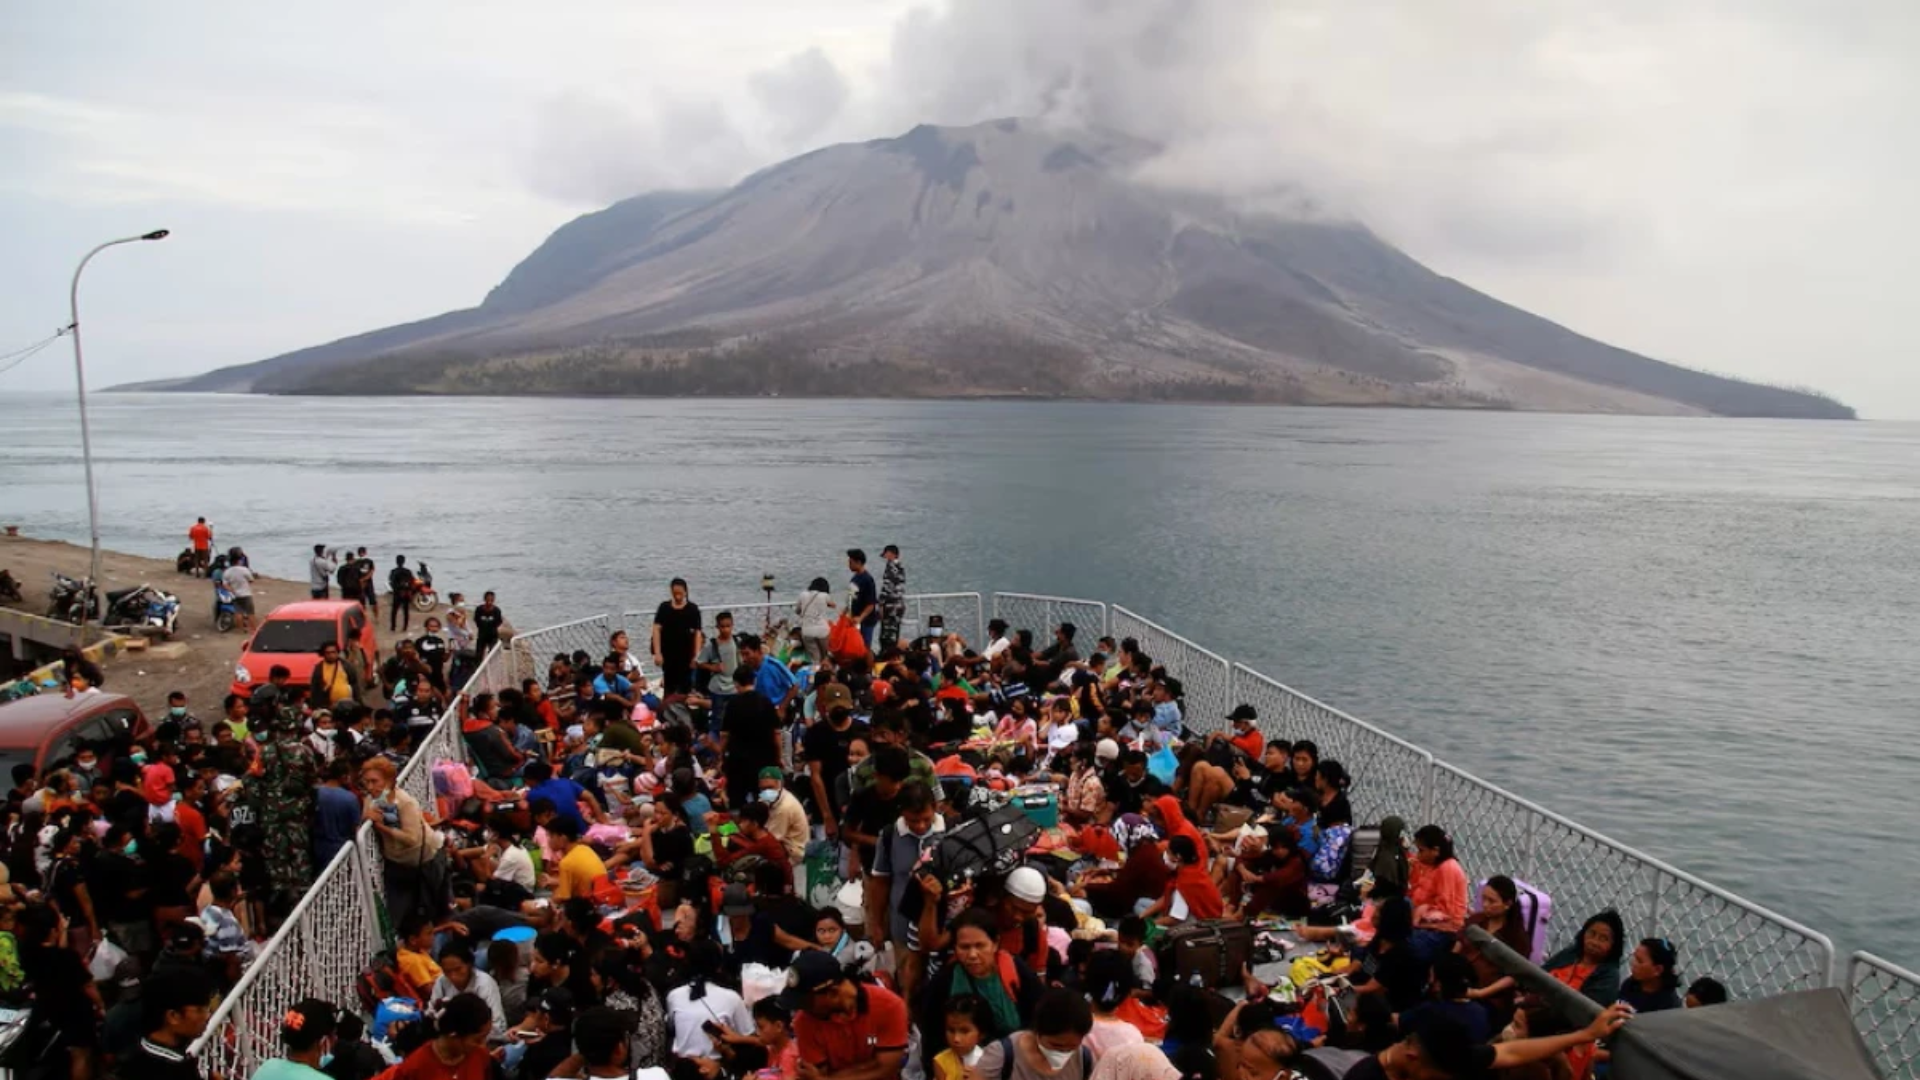 Thousands Evacuate Due To Indonesia Volcano Eruptions, Flights Canceled